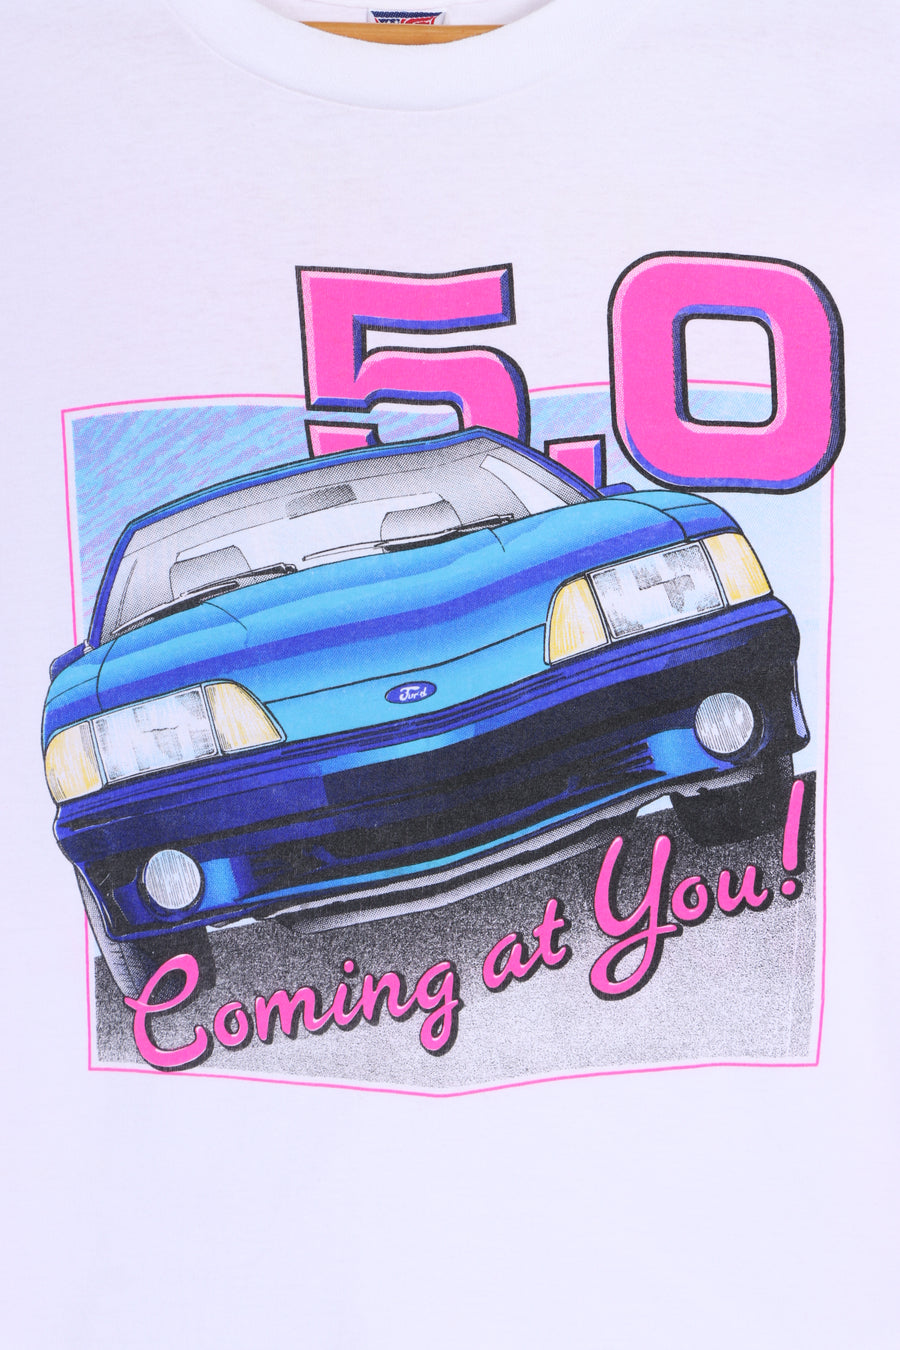 Ford Mustang 5.0 "Gone With The Wind" Front Back Single Stitch Tee USA Made (M-L)